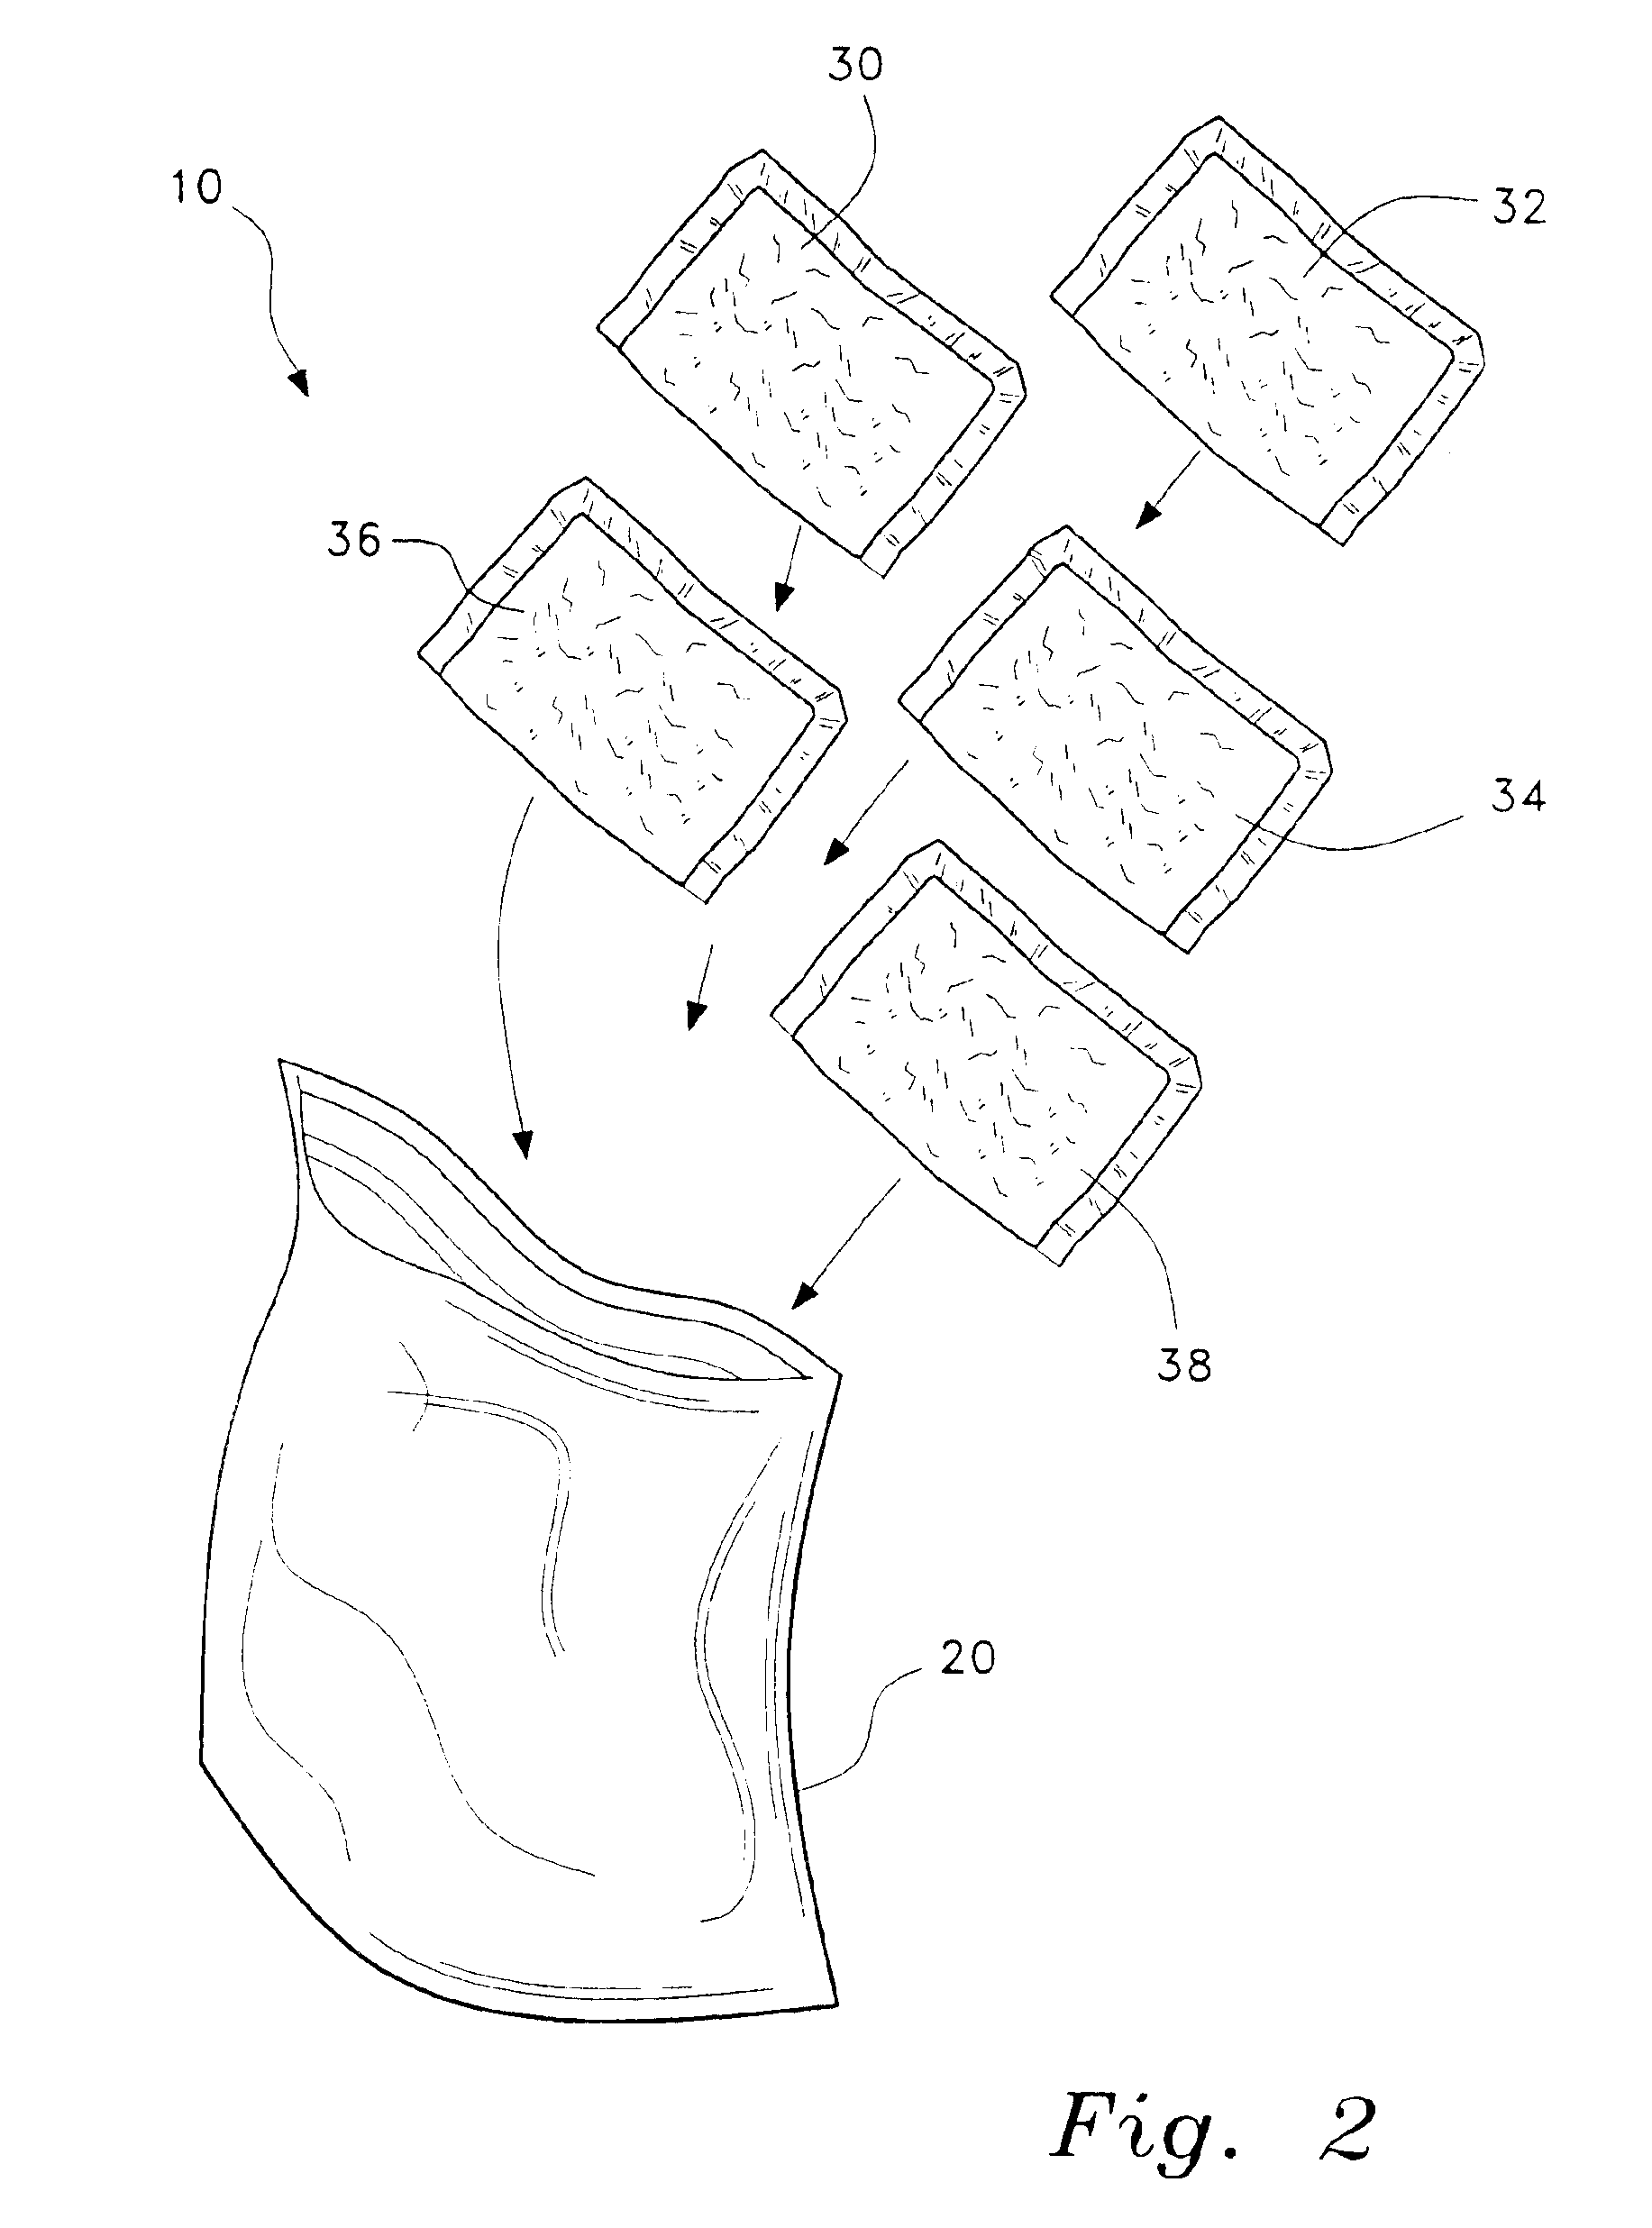 Bath product and method of use